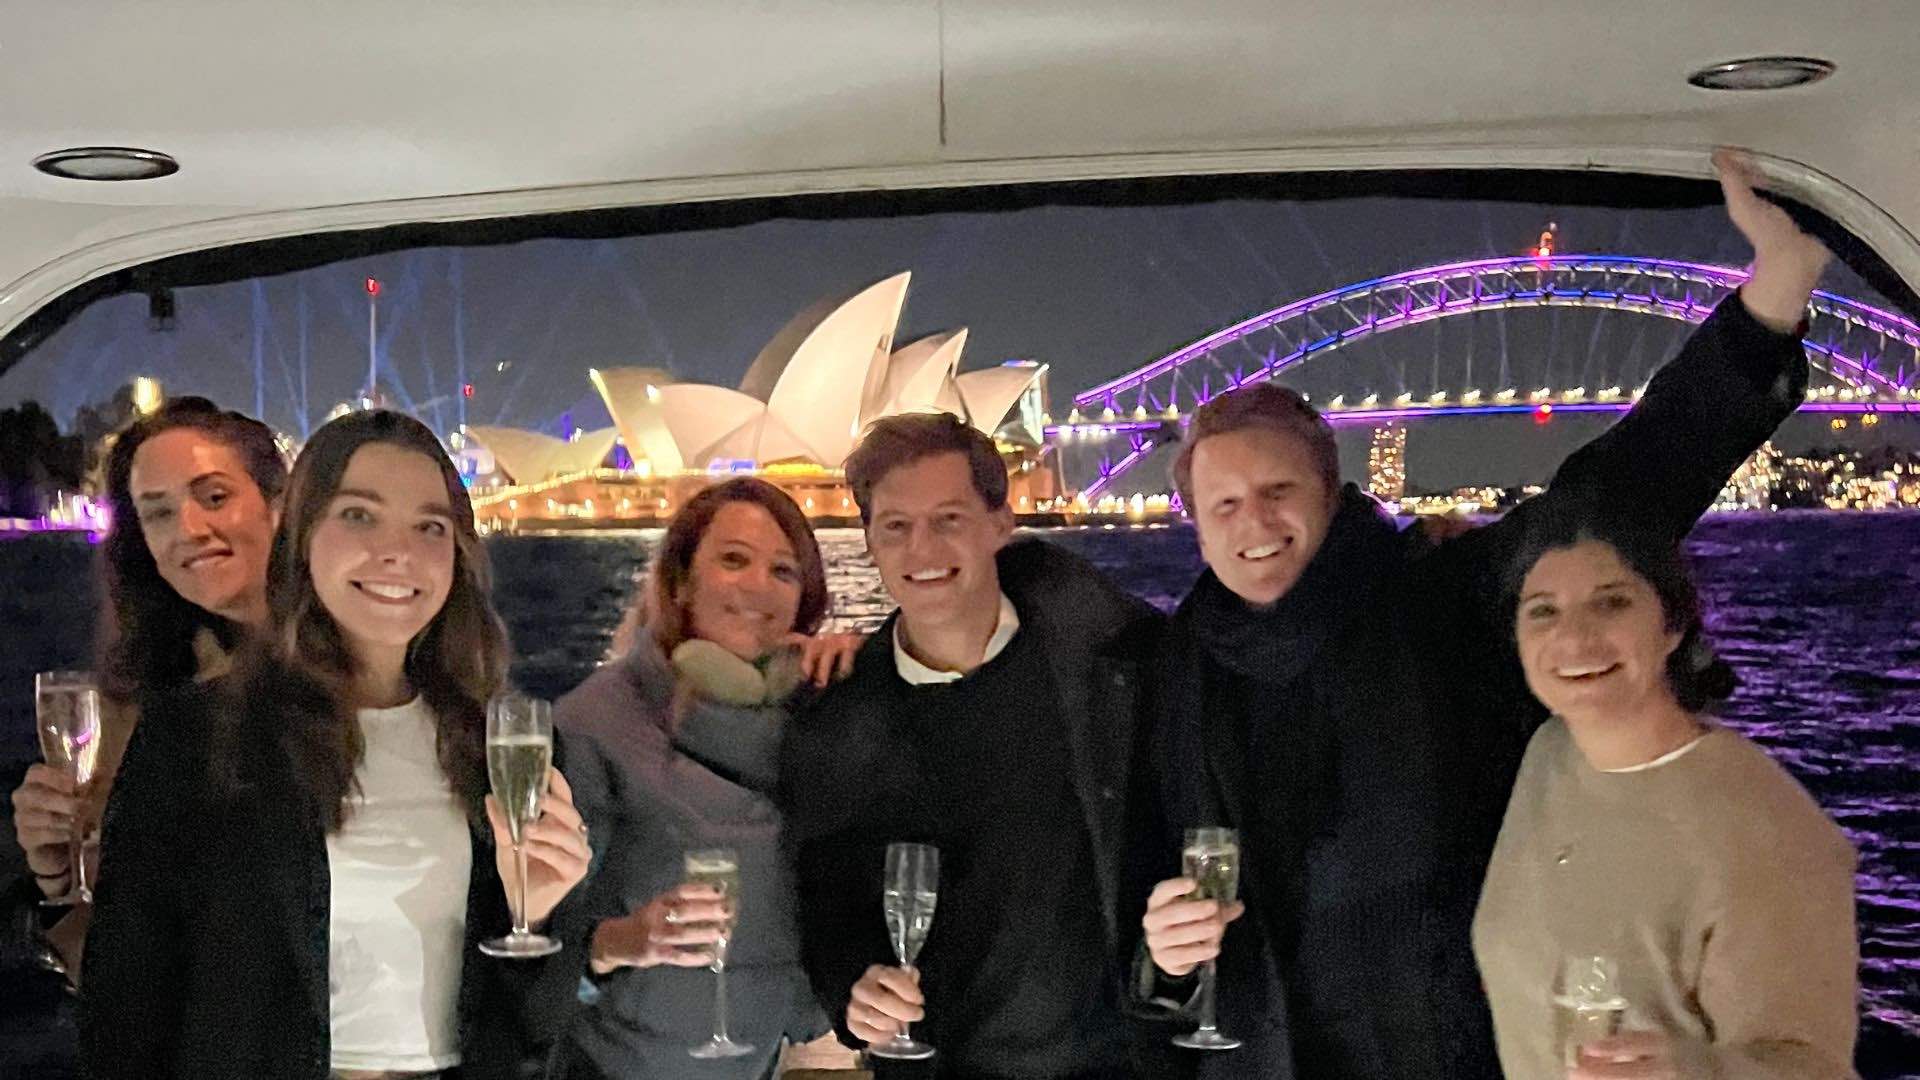 Vivid Sydney Private Harbour Cruise - Up To 12 Guests